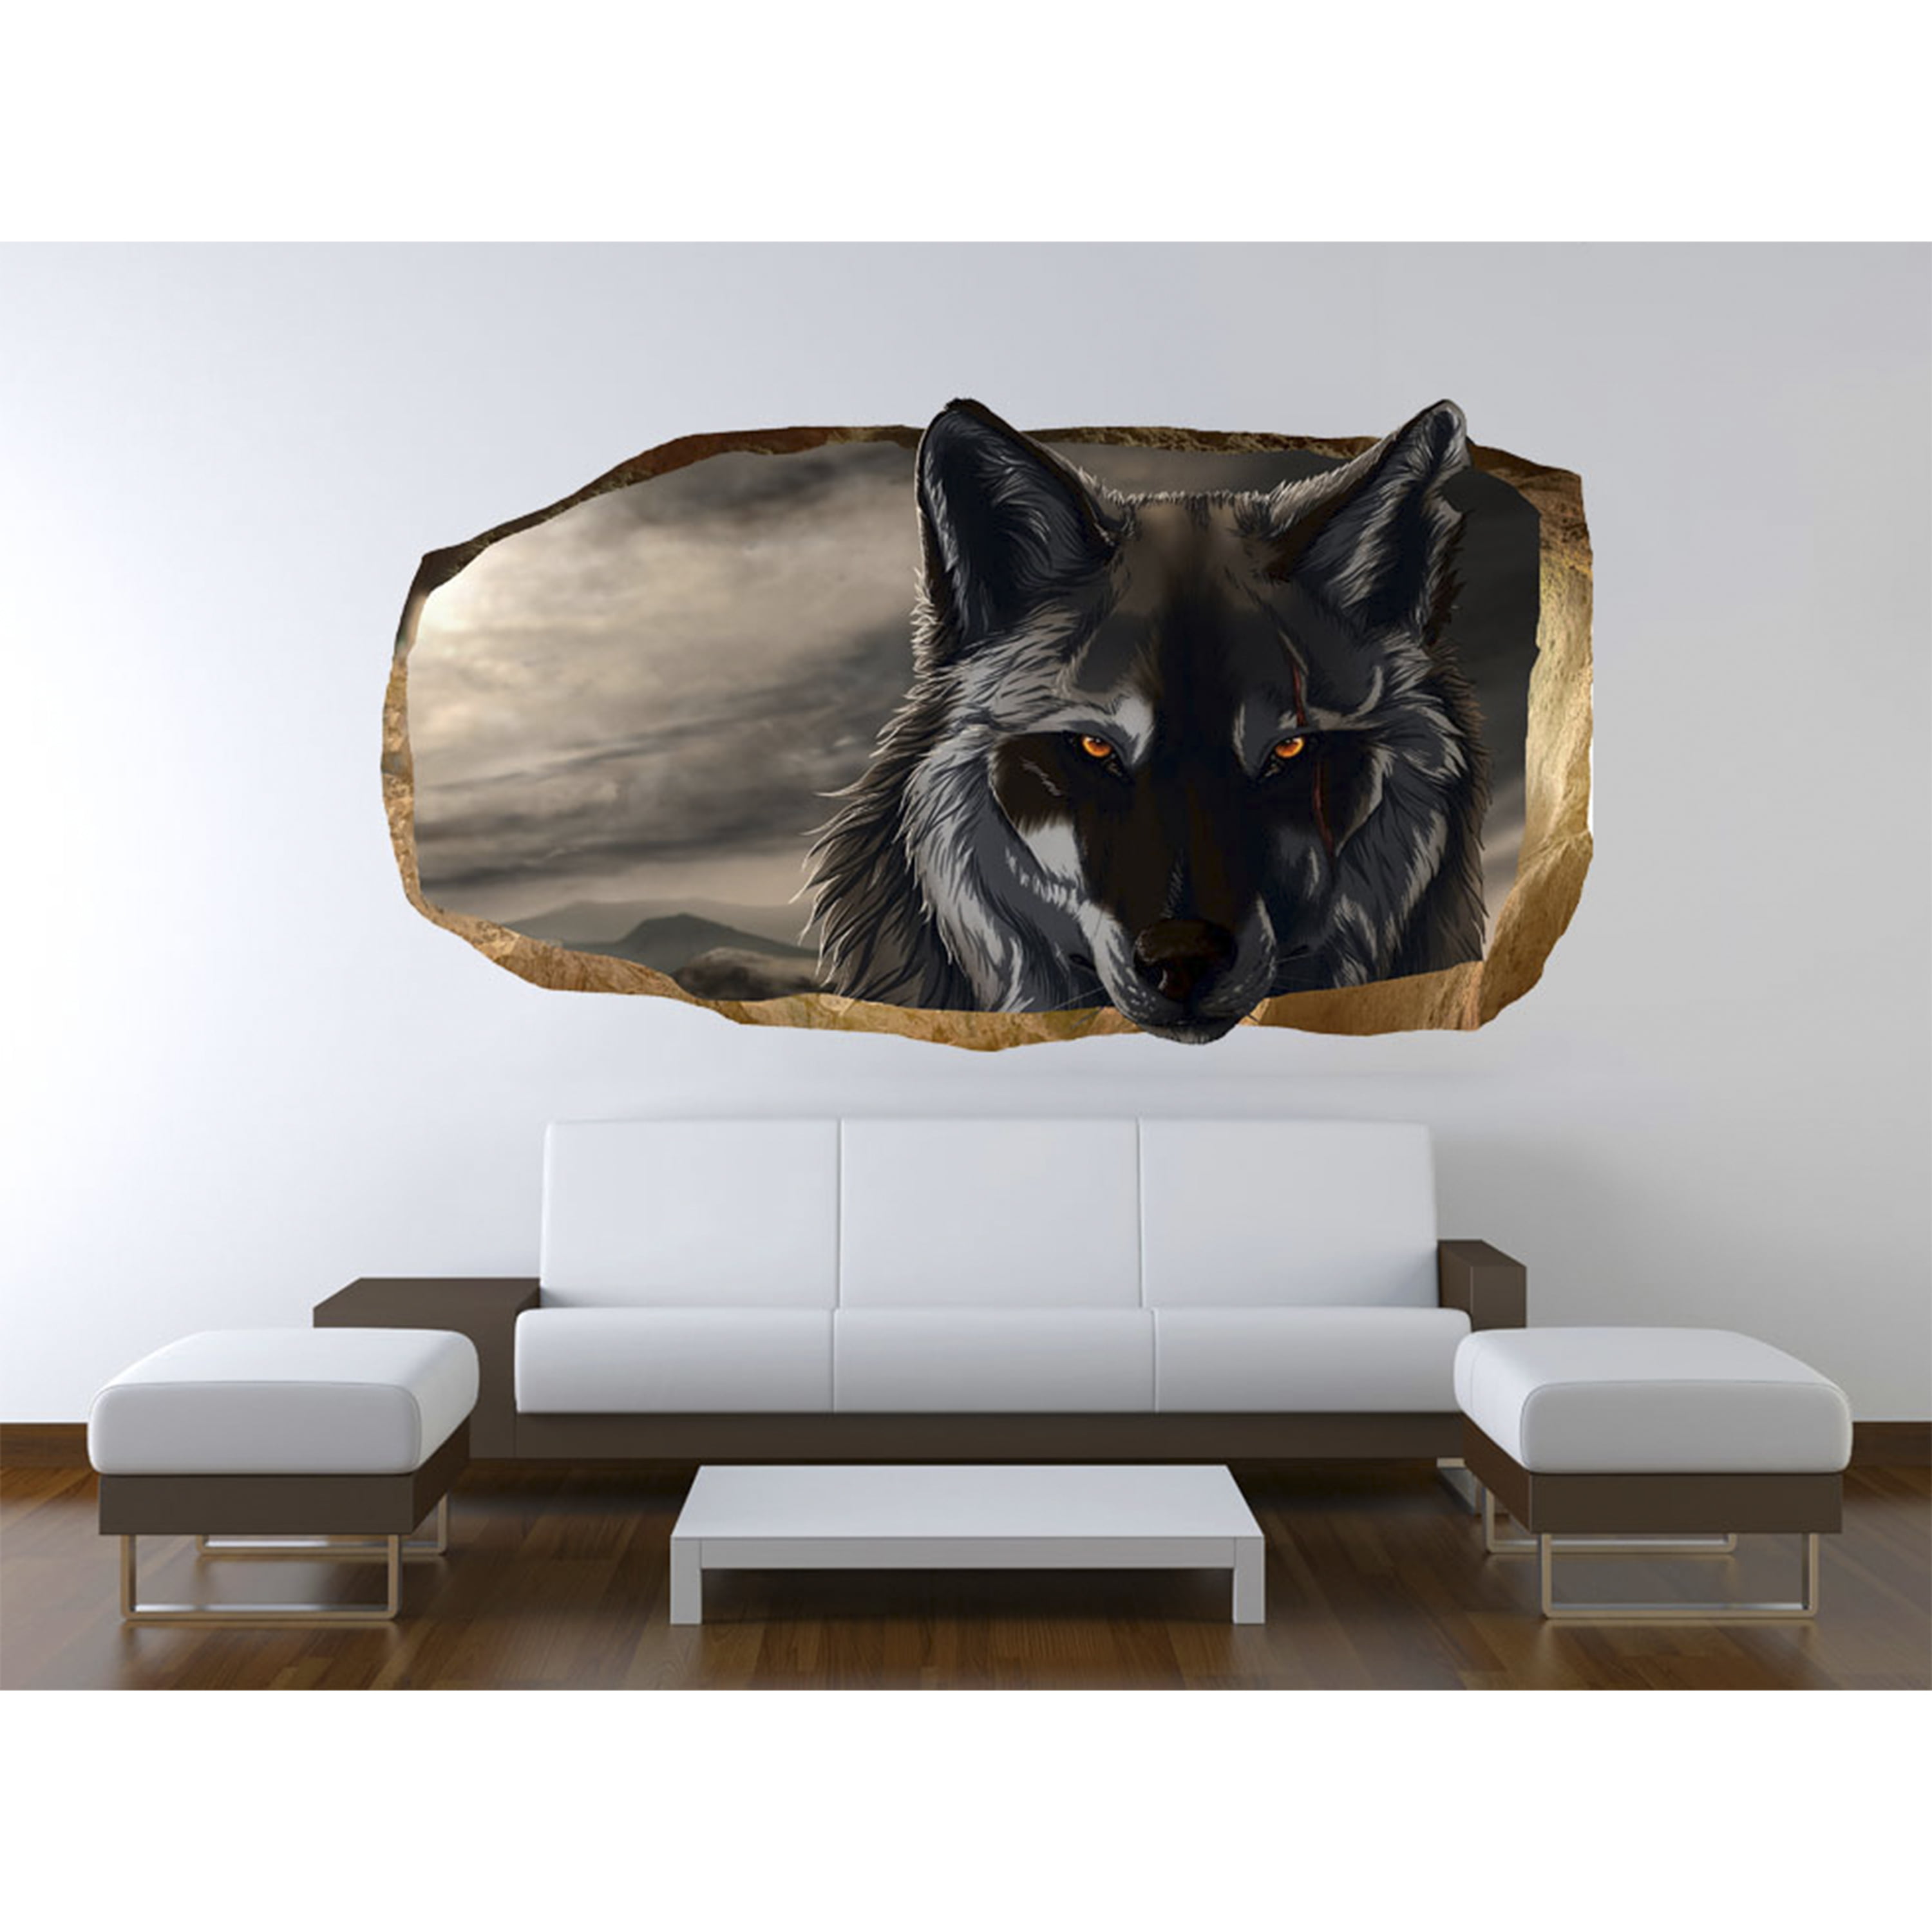 Startonight 3D Mural Wall Art Photo Decor Wolf Amazing Dual View Surprise  Wall Mural Wallpaper for Bedroom Animals Art Large  '' By  '' -  